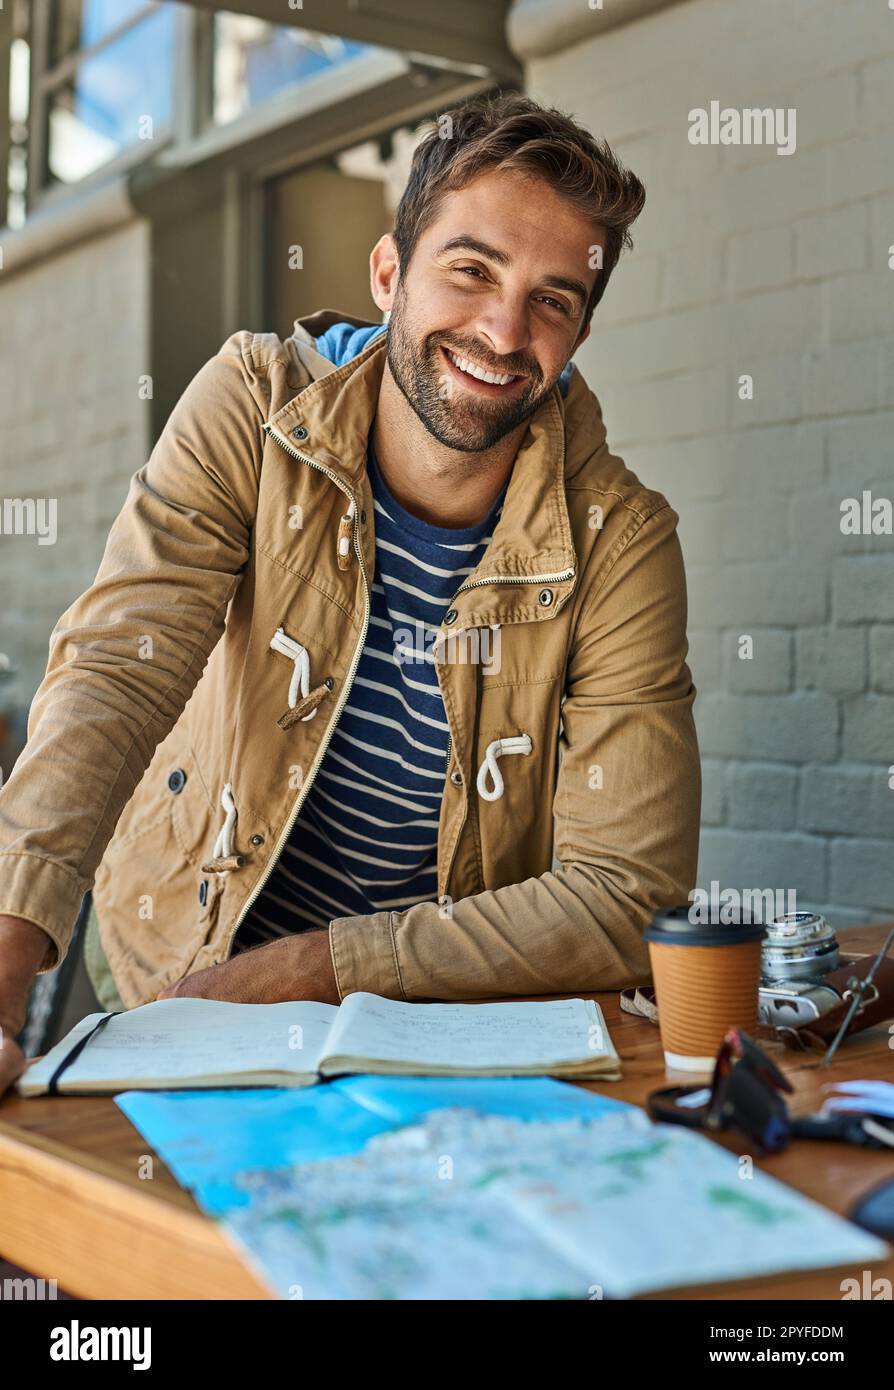 Hes a regular globetrotter. Portrait of a laid-back tourist enjoying a cup of coffee at a sidewalk cafe. Stock Photo